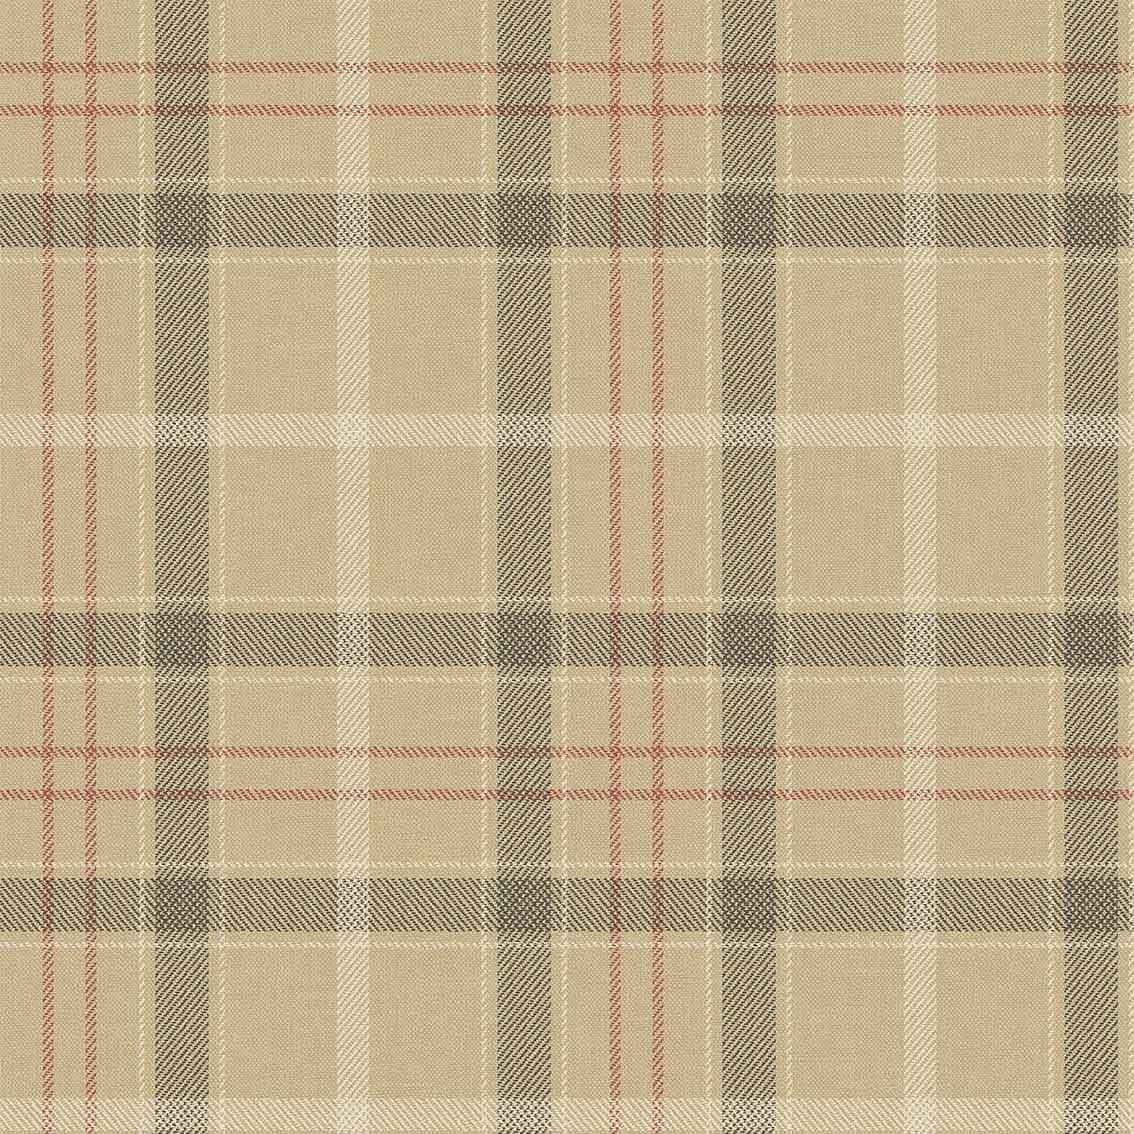 Red Checkered Wallpaper